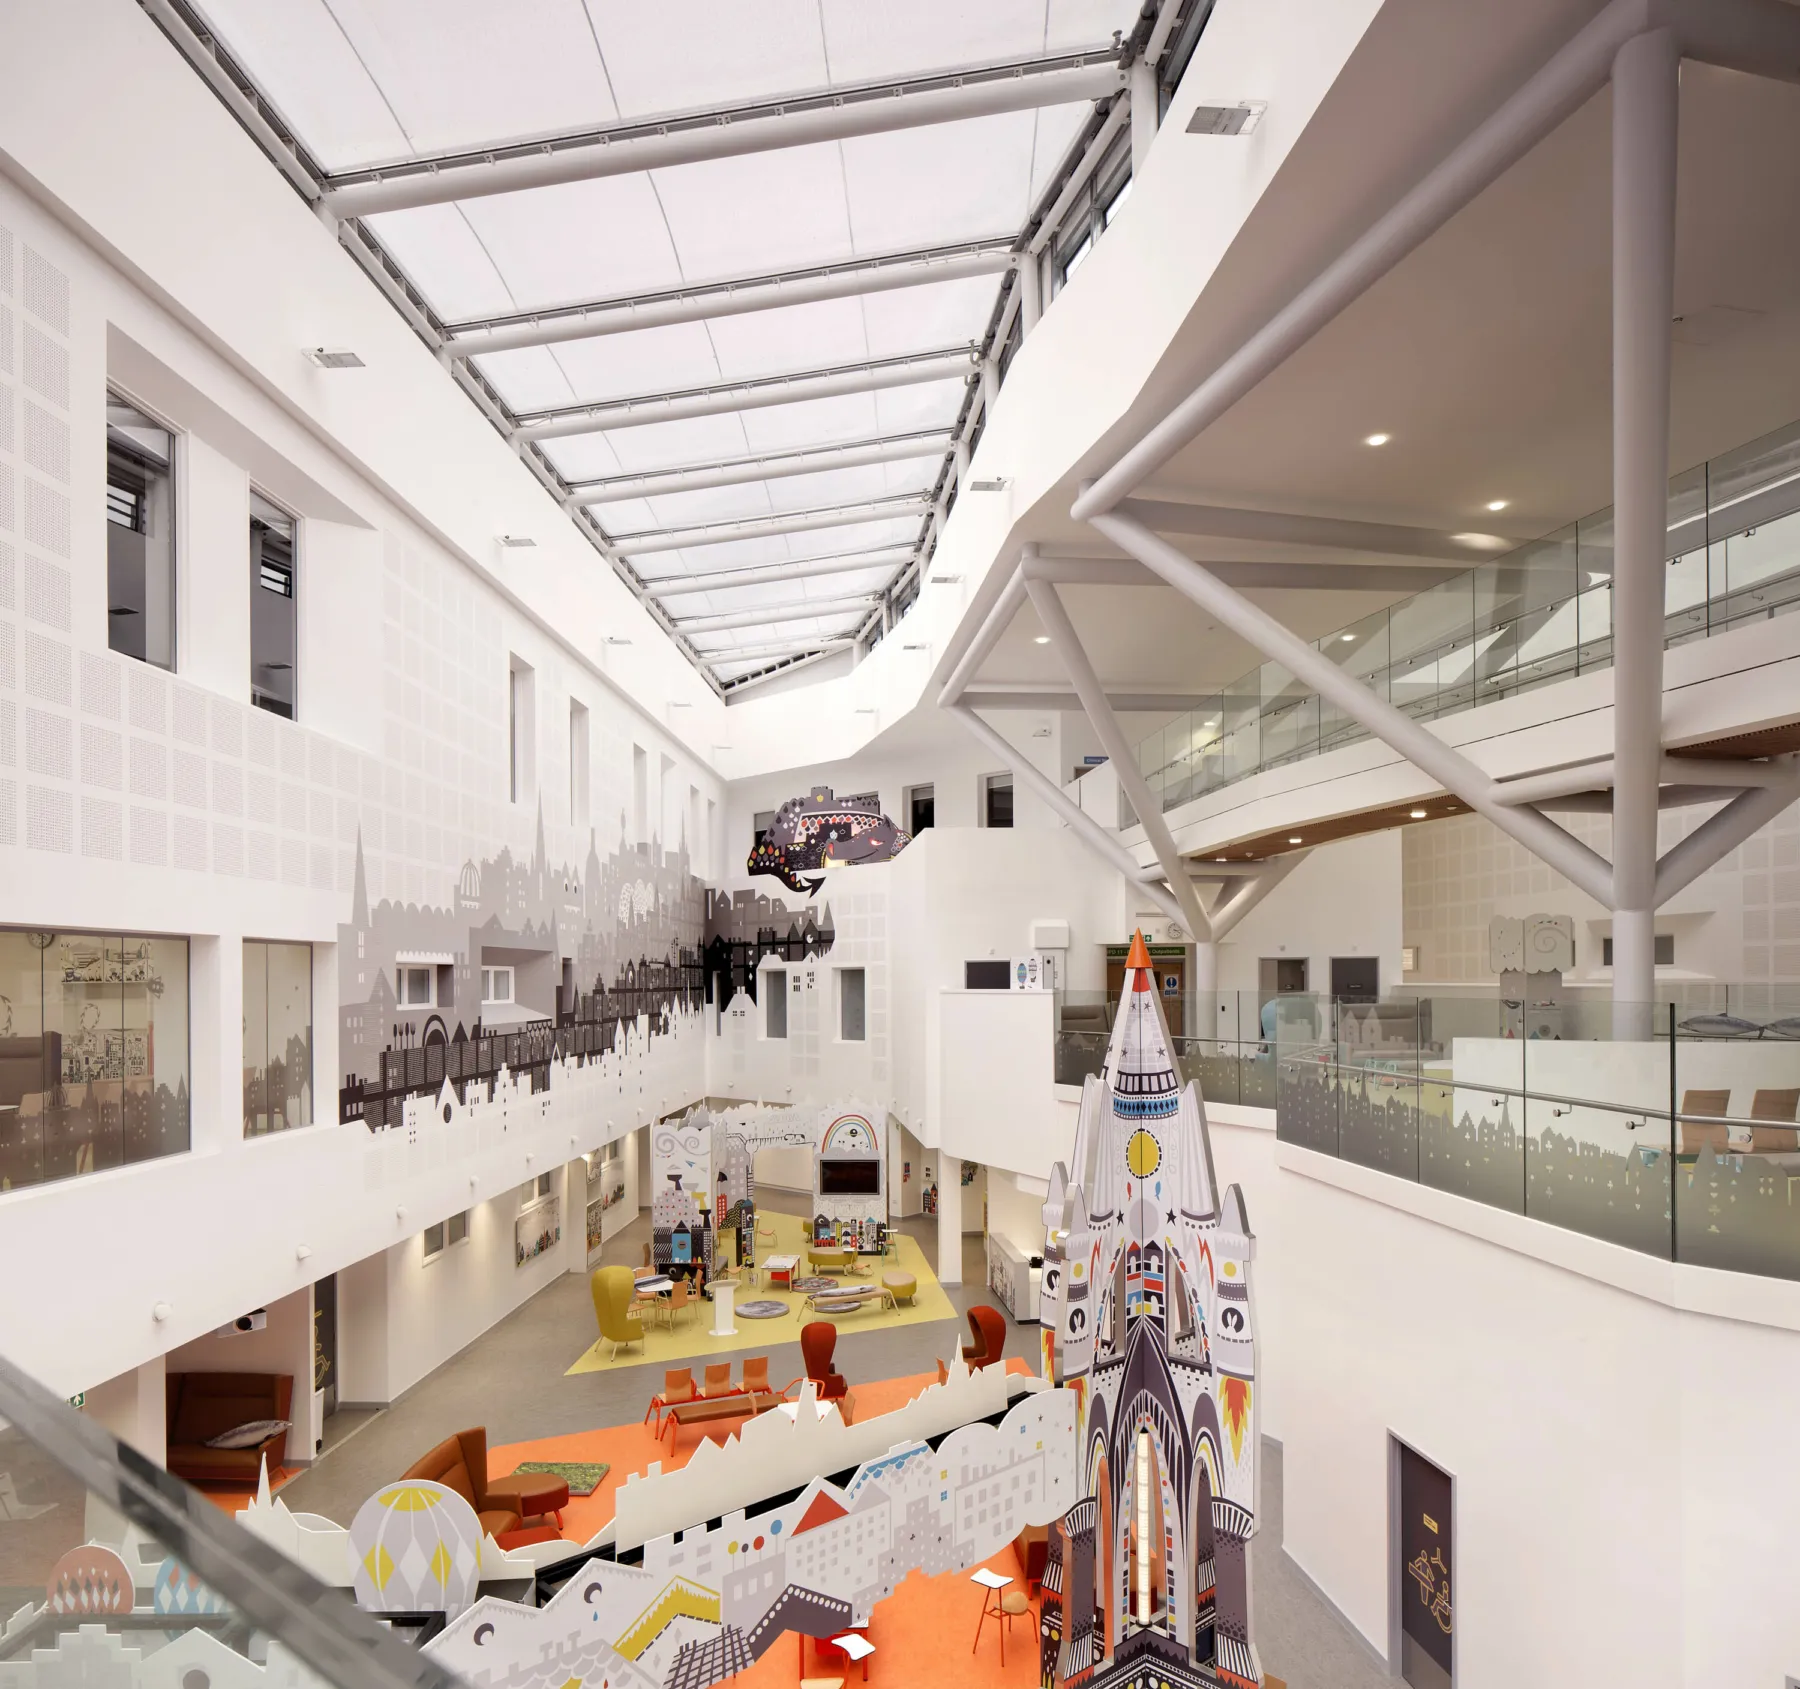 A view into the atrium at the Royal Hospital for Sick Children, Edinburgh, from the first floor gallery. A glass roof creates a brightly lit space with sculpture, a wall mural colour and playful design features.